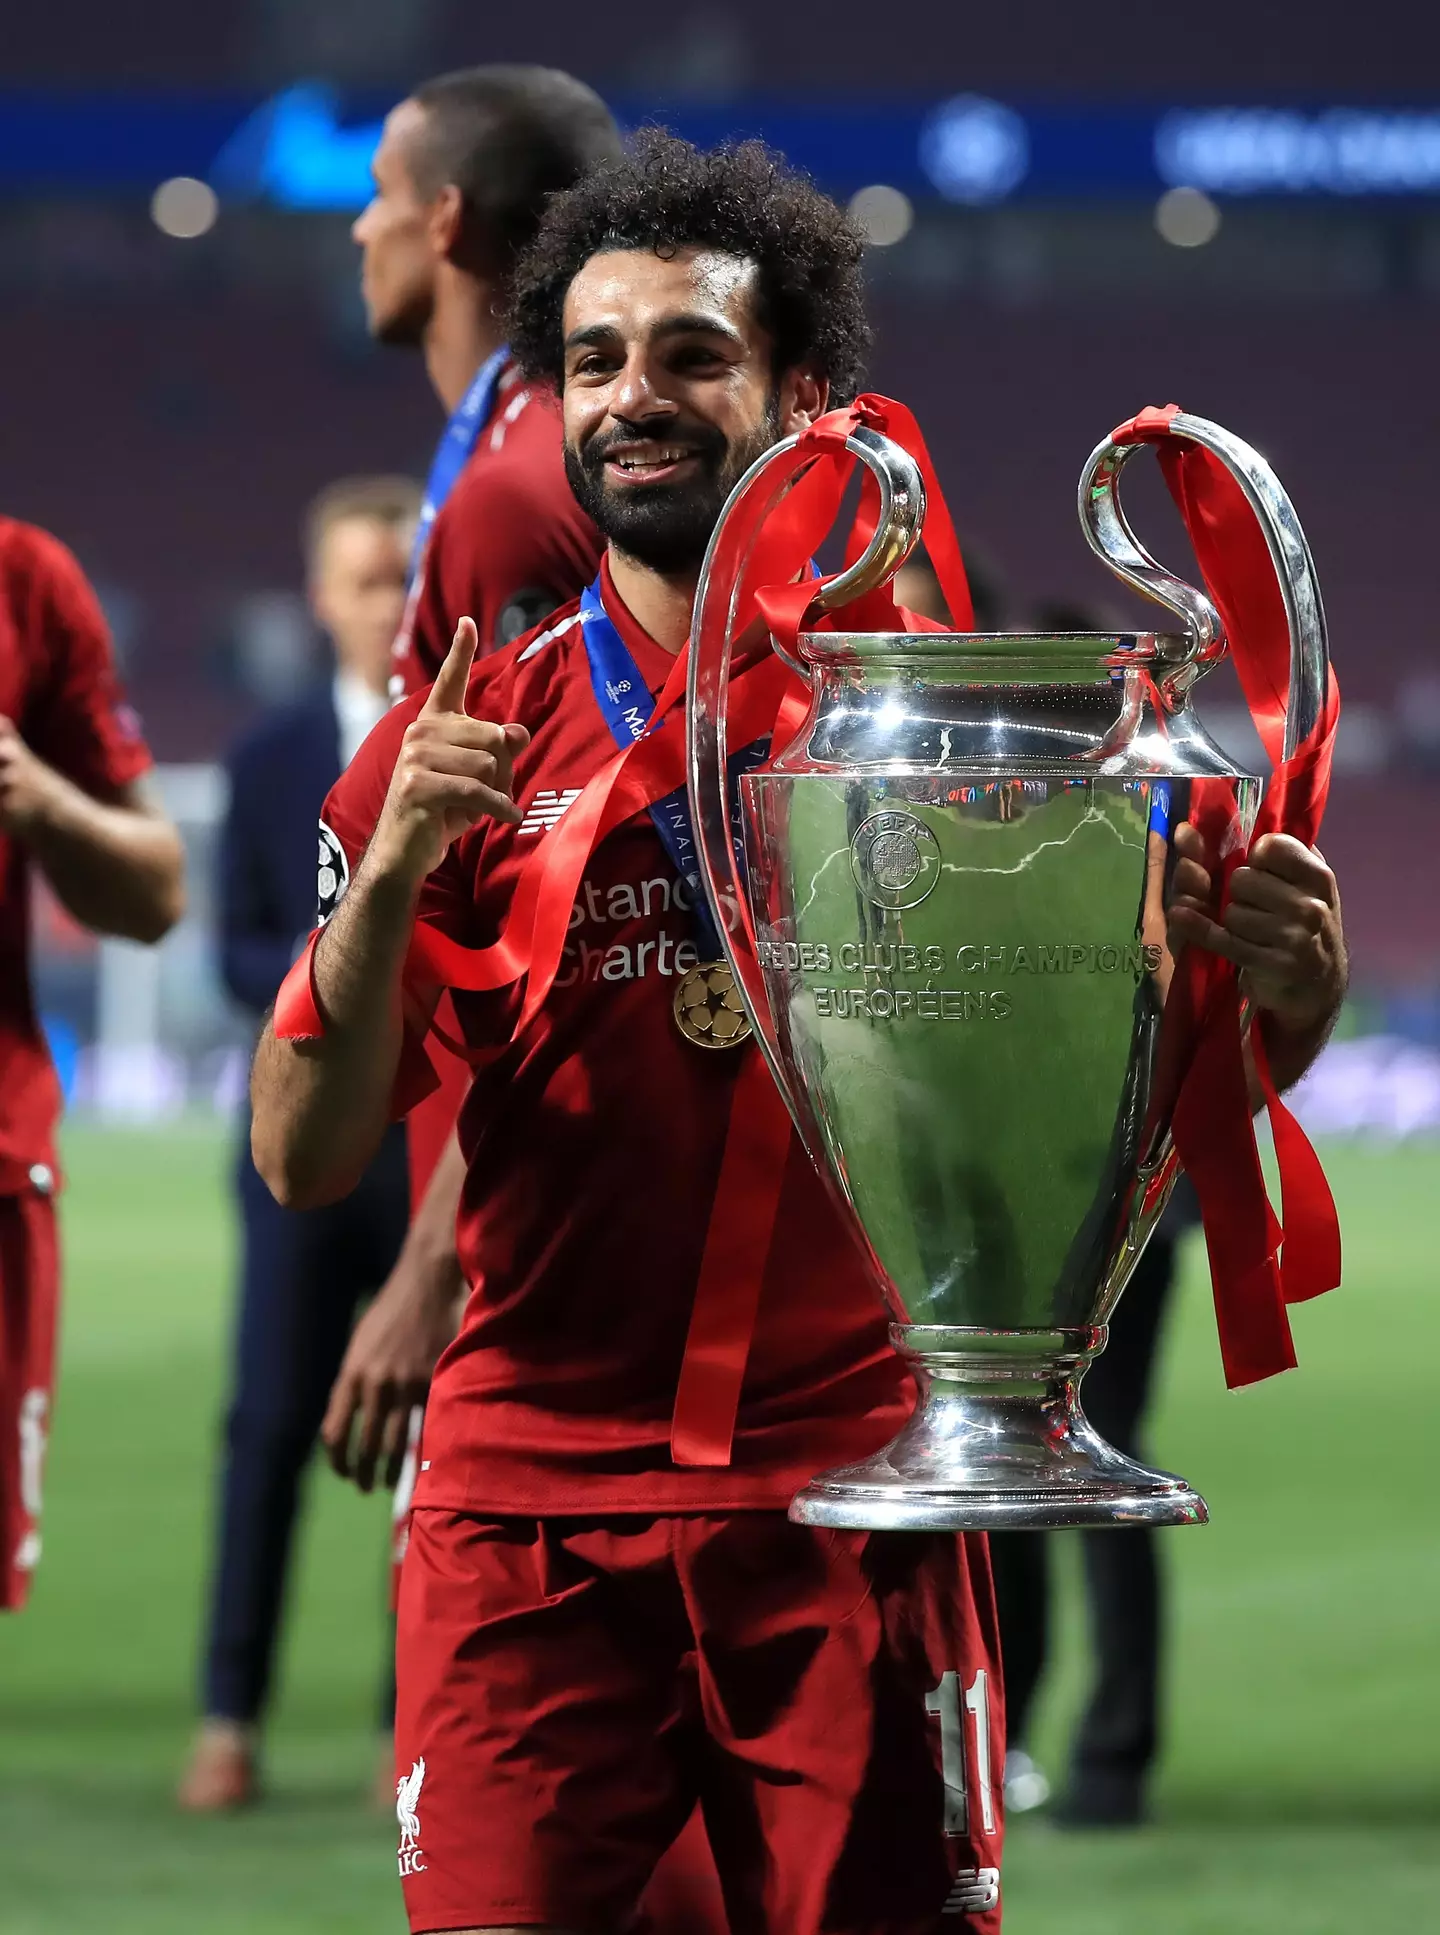 Salah has won both the Premier League and Champions League with Liverpool (Image: PA)